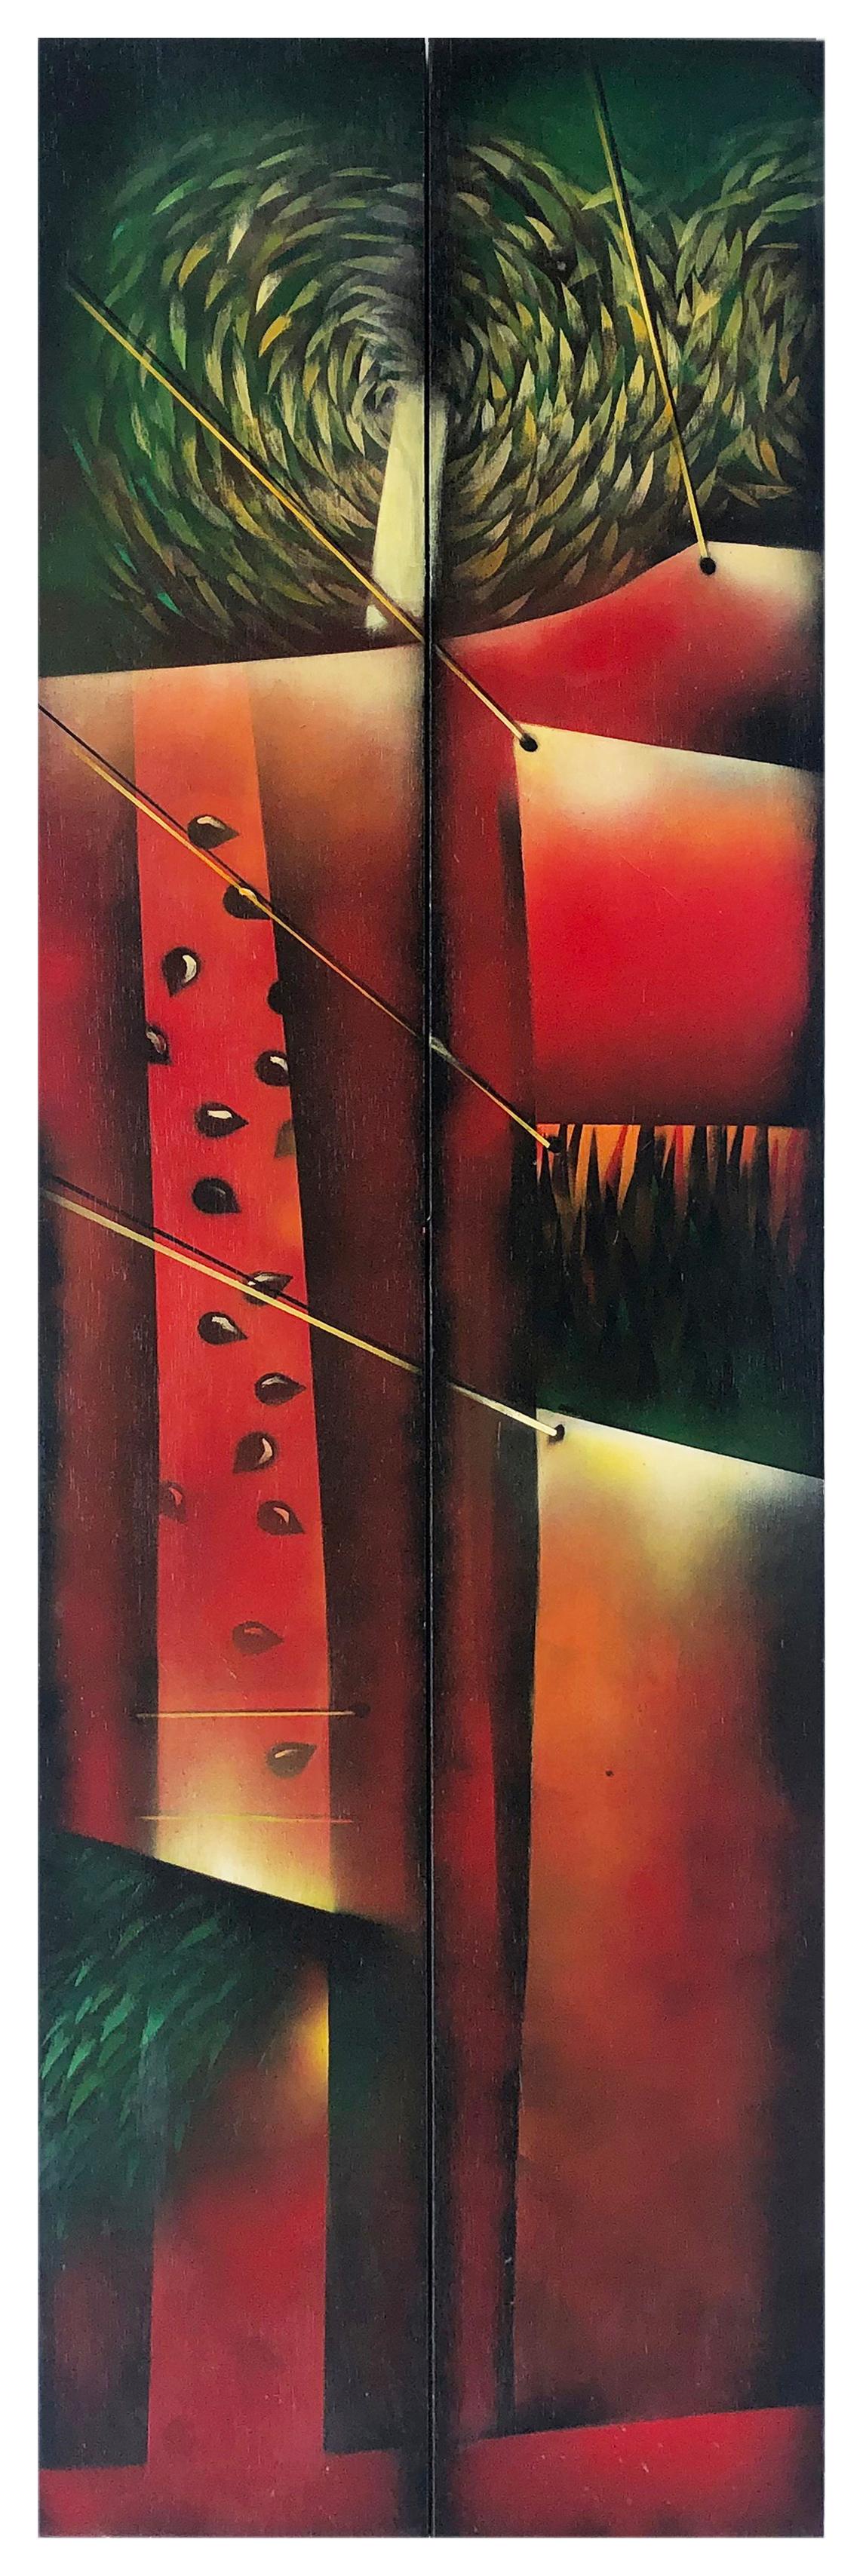 Abstract Painted 2-Panel Screens by Pedro Damian Cuban-American Artist, Pair

Offered for sale is a vintage pair of diptych abstract painted screens by Pedro Damian, a Cuban-American Artist. The screen paintings are signed and dated 1999 as shown.